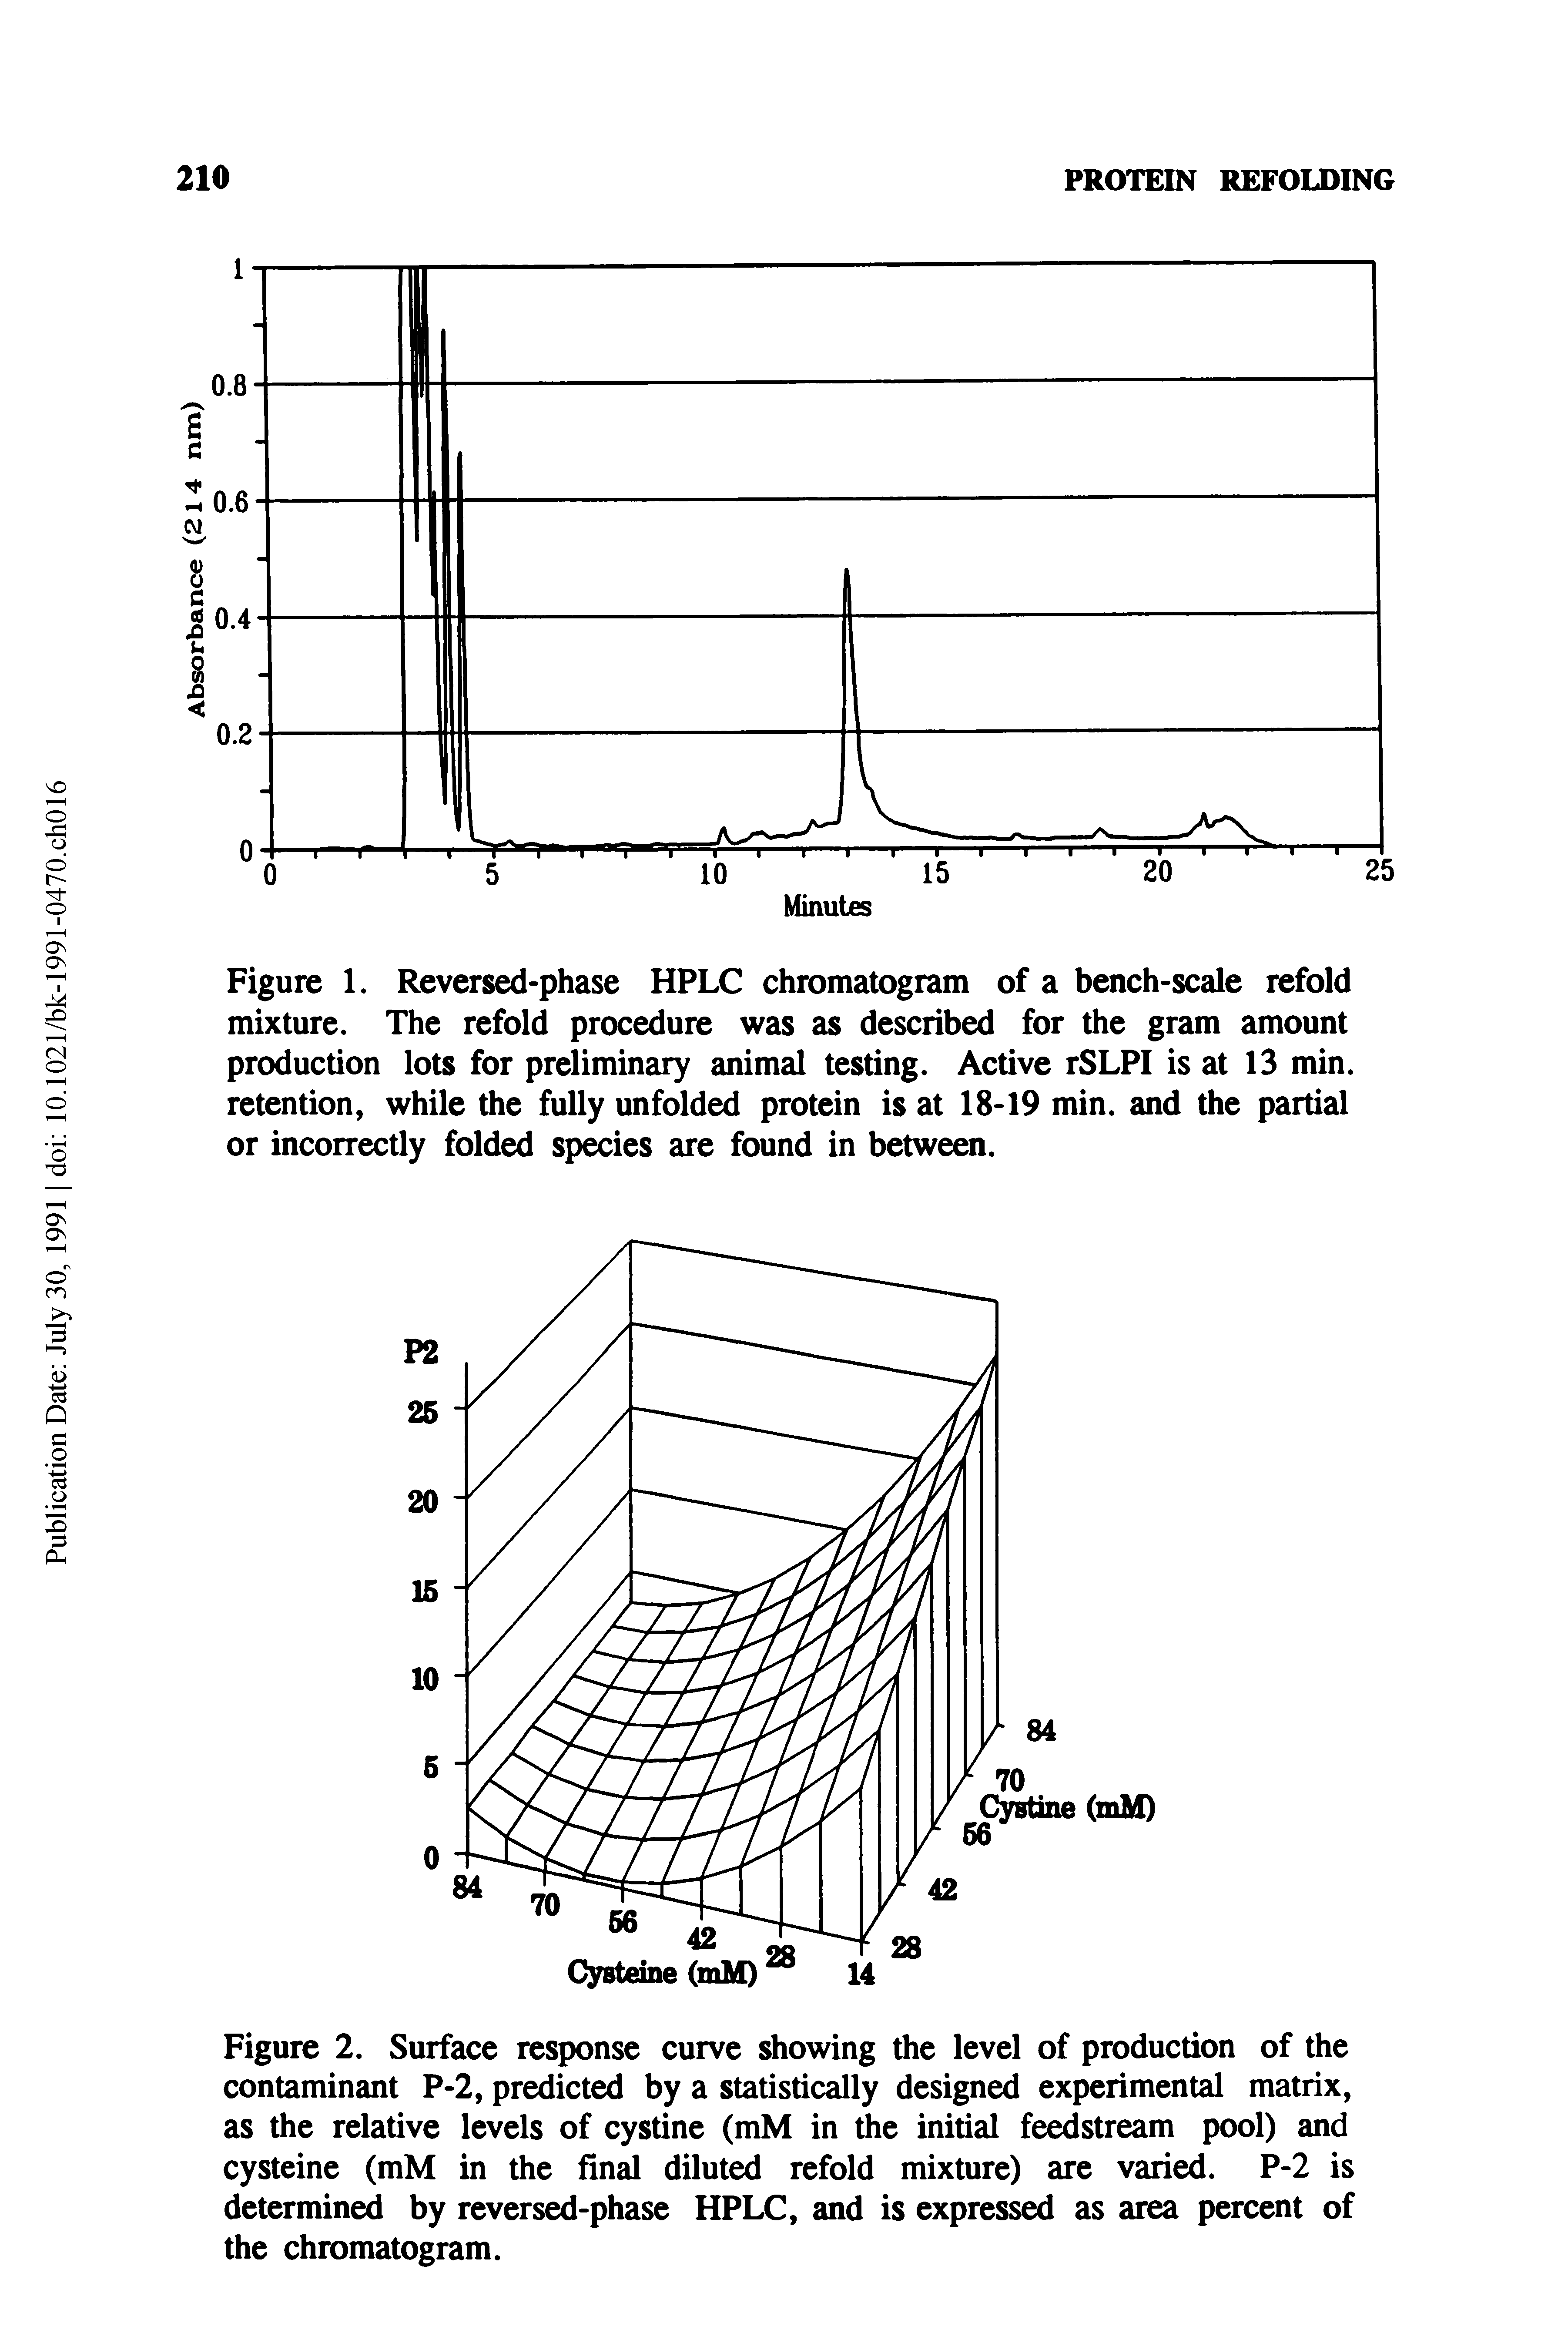 Figure 2. Surface response curve showing the level of production of the contaminant P-2, predicted by a statistically designed experimental matrix, as the relative levels of cystine (mM in the initial feedstream pool) and cysteine (mM in the find diluted refold mixture) are varied. P-2 is determined by reversed-phase HPLC, and is expressed as area percent of the chromatogram.